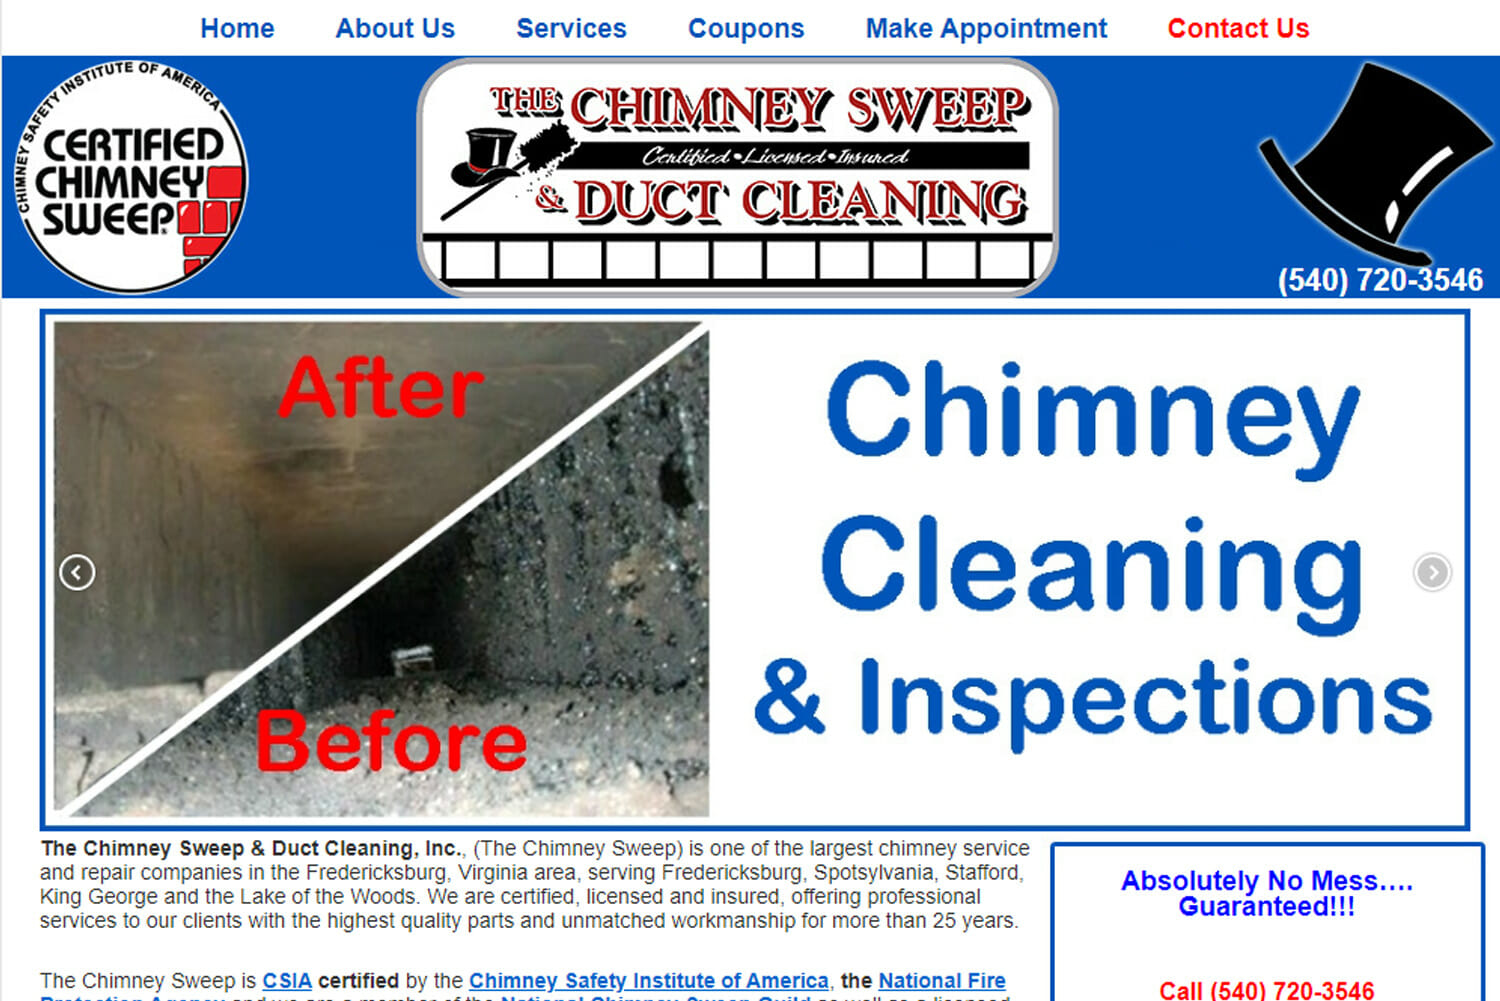 The Chimney Sweep & Duct Cleaning